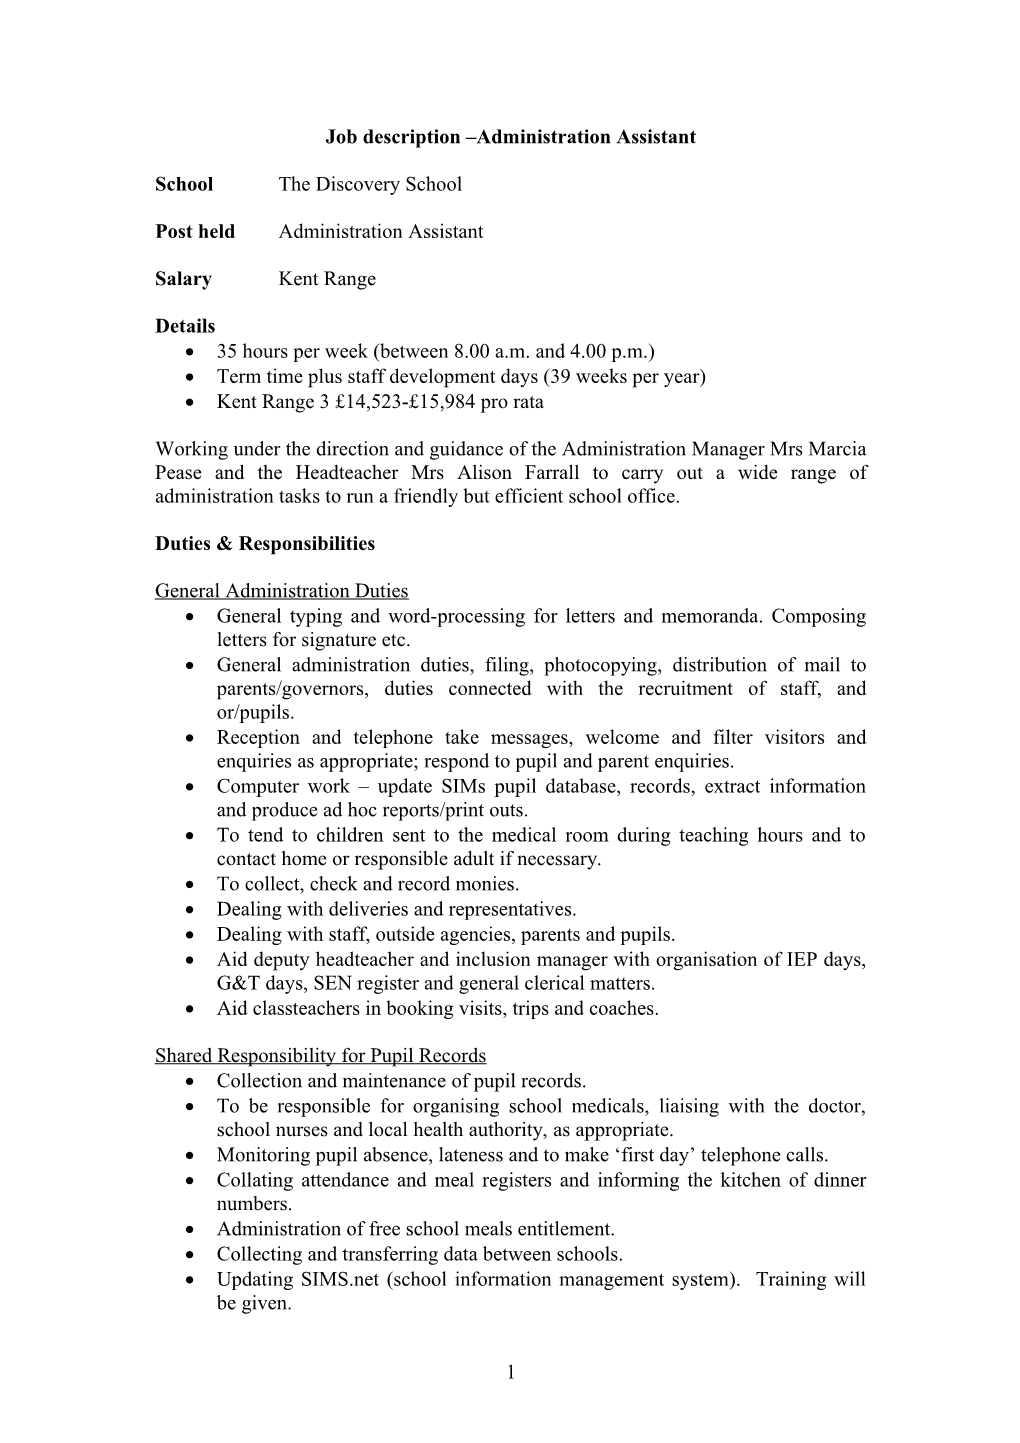 Job Description - Learning Support Assistant for Early Years